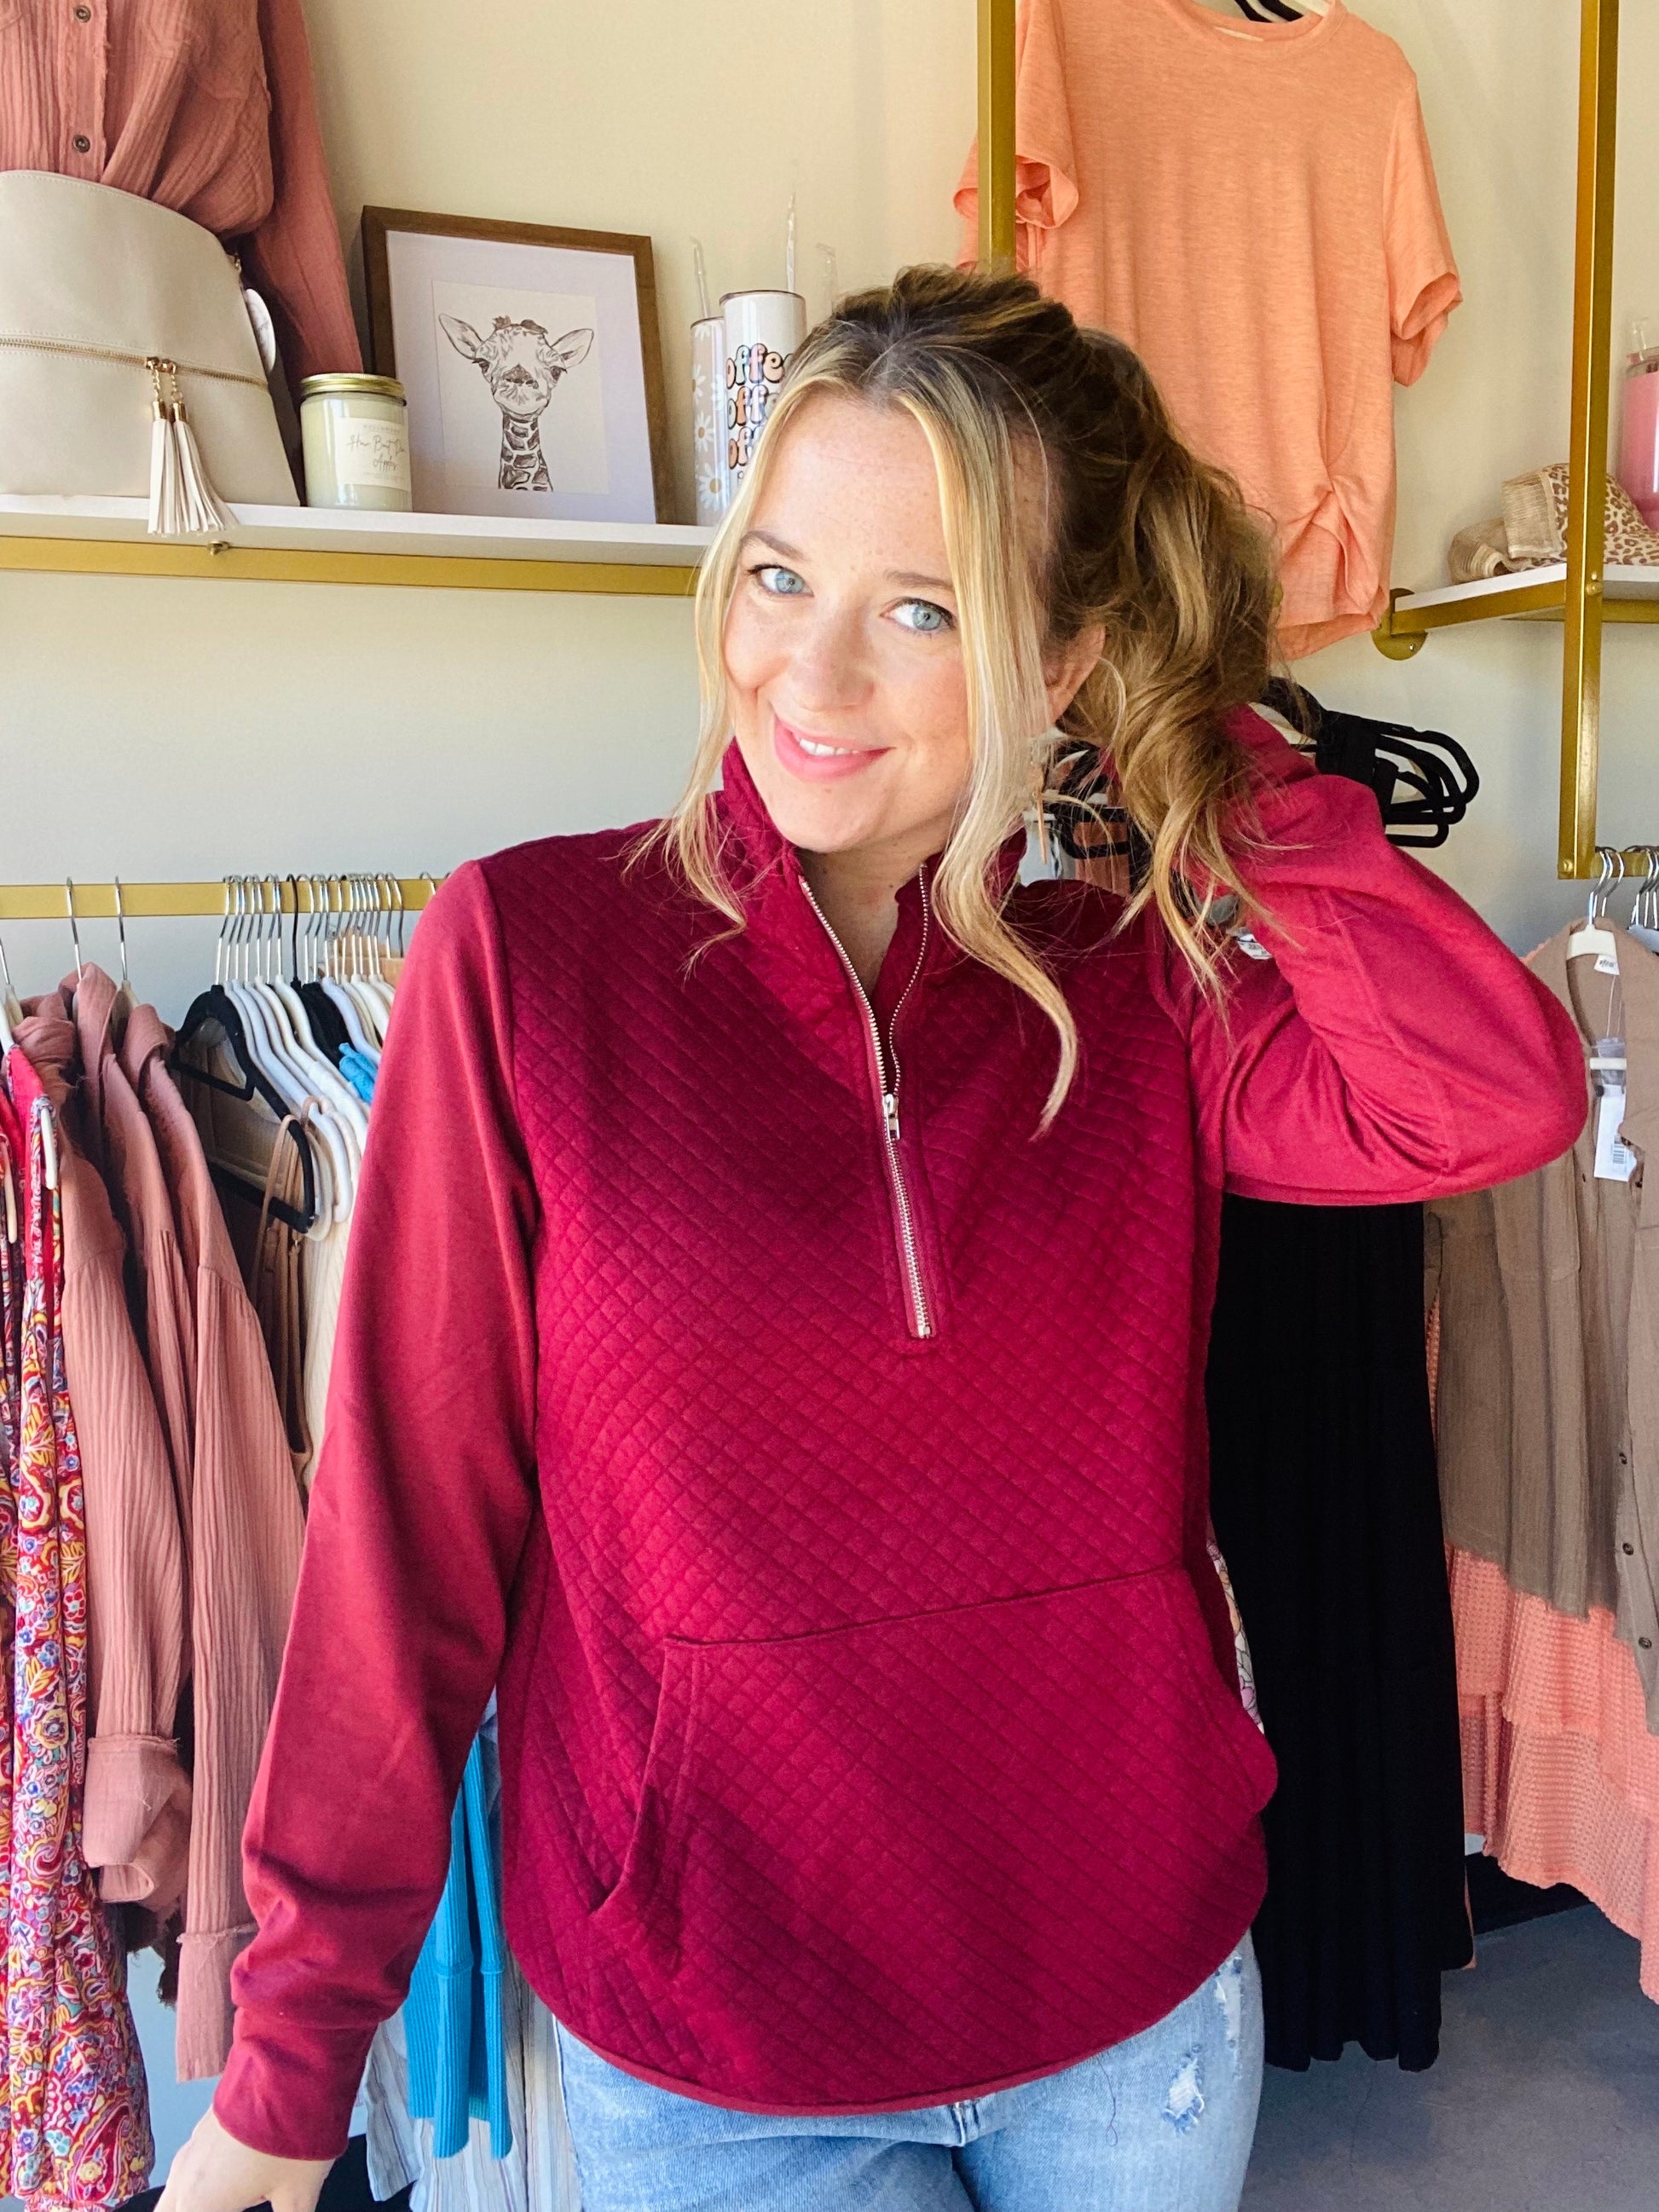 The Wine Quilted Quarter Zip is a stylish and versatile choice for any wardrobe. A richly-colored deep berry hue is complemented by a functioning zipper and a convenient kangaroo pocket. It's a great option for dressing up or down.